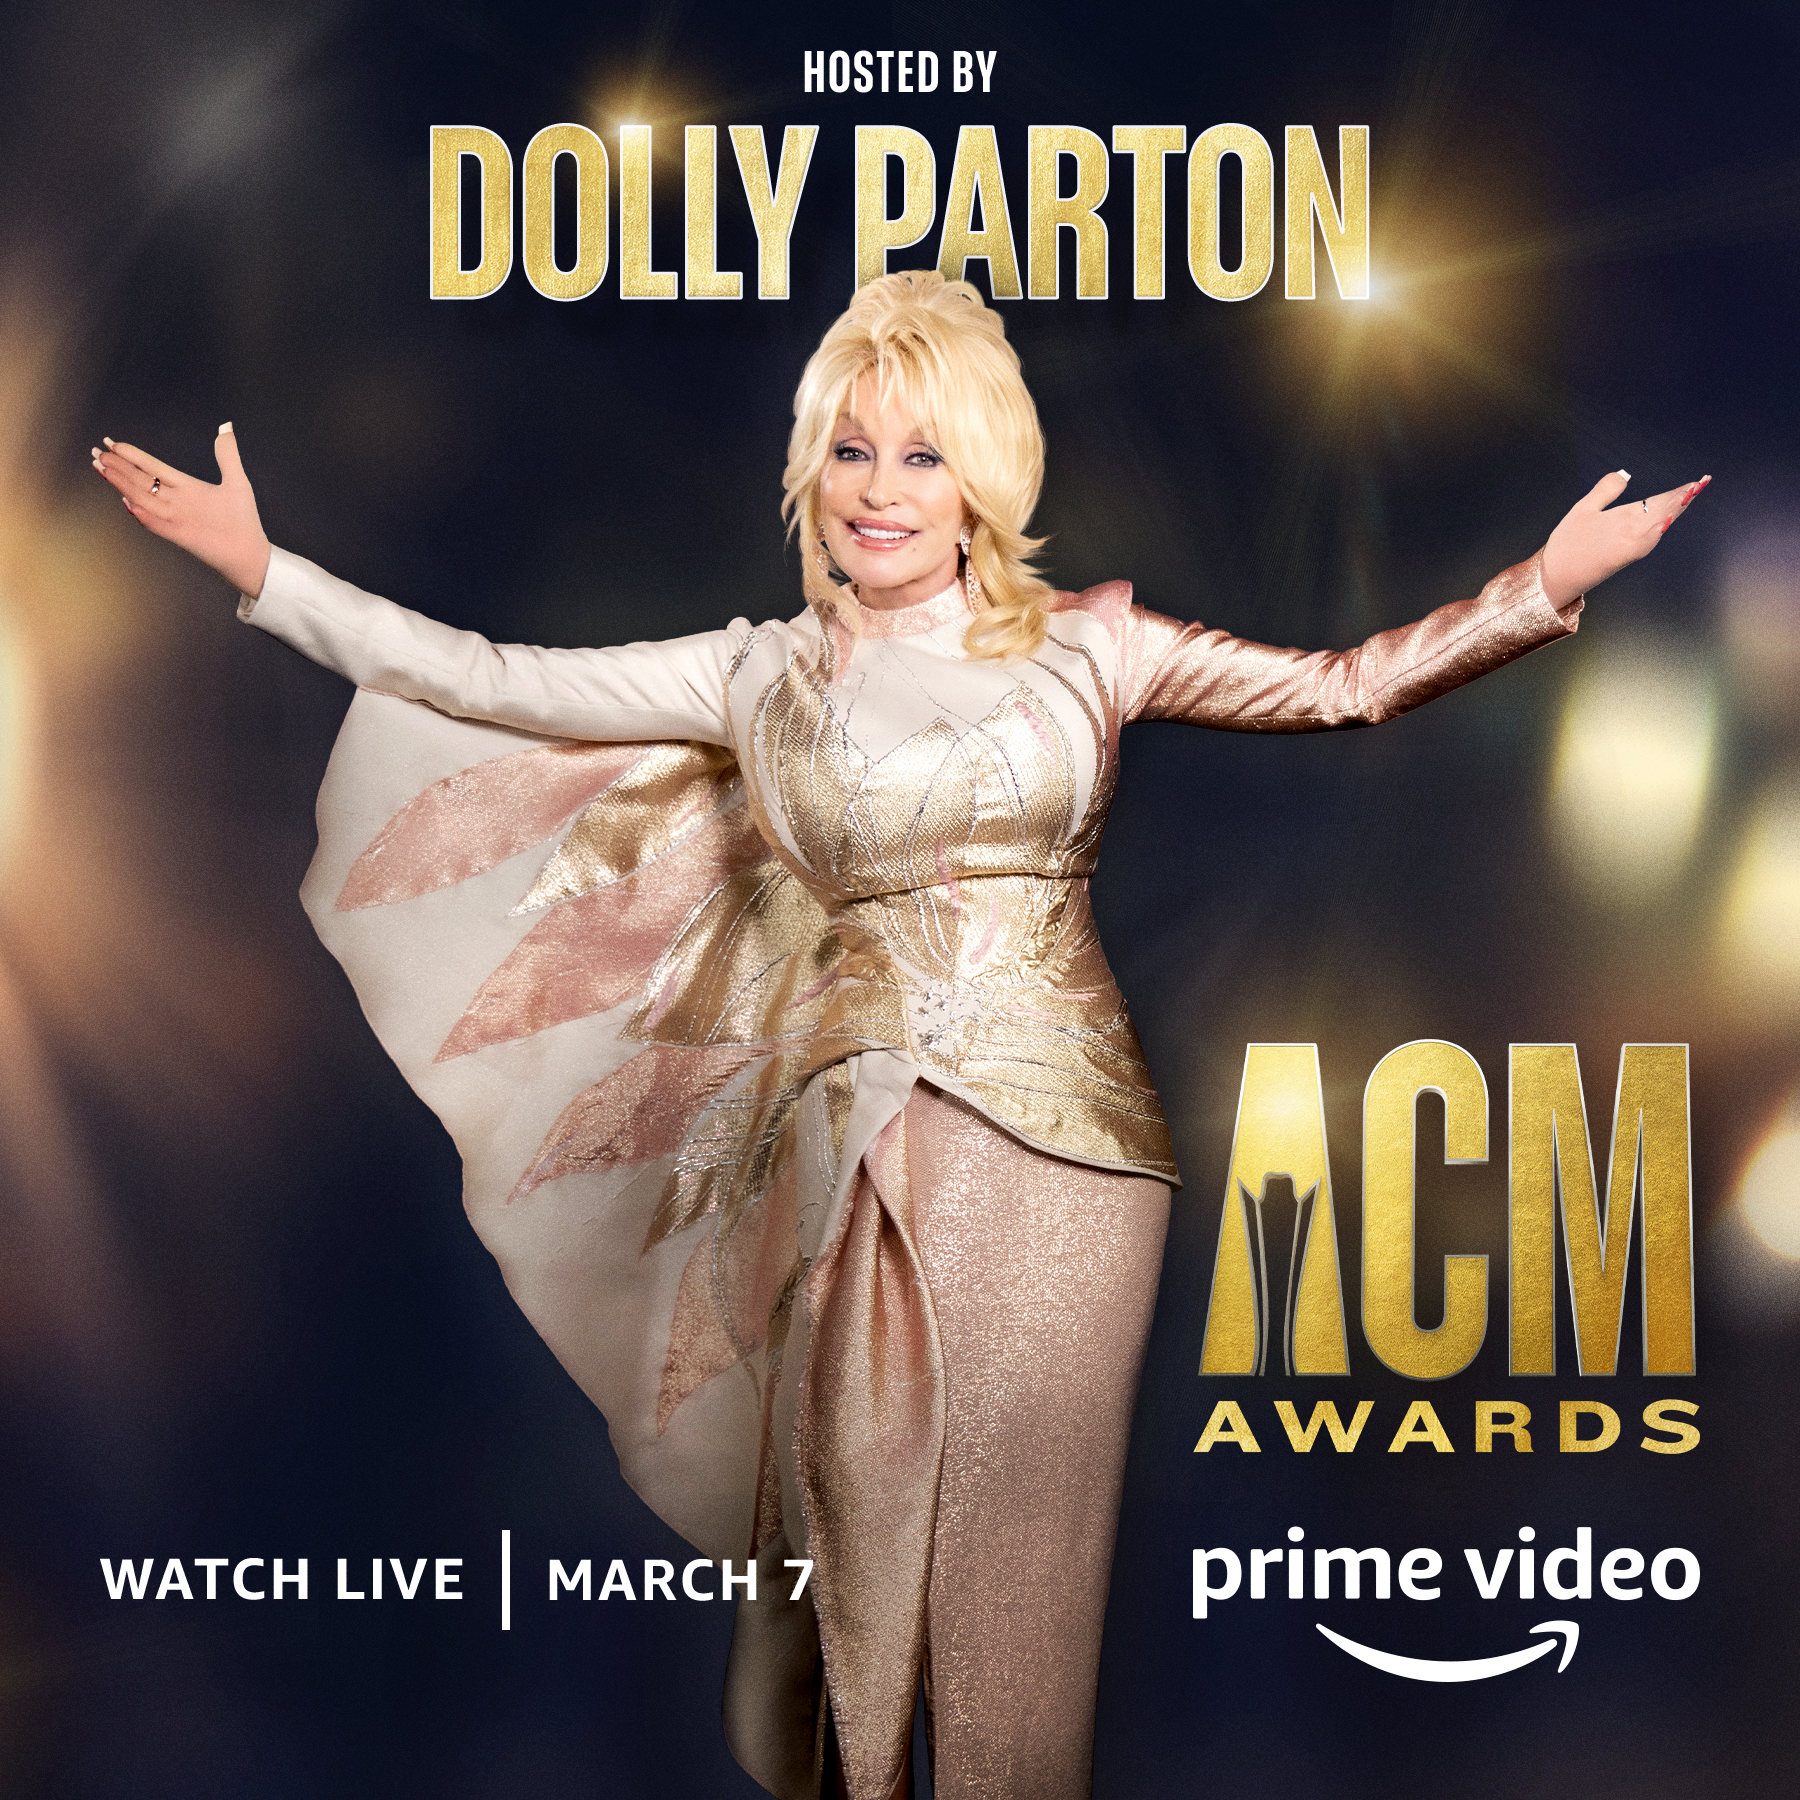 Dolly Parton Is Set To Host the 57th ACM Awards